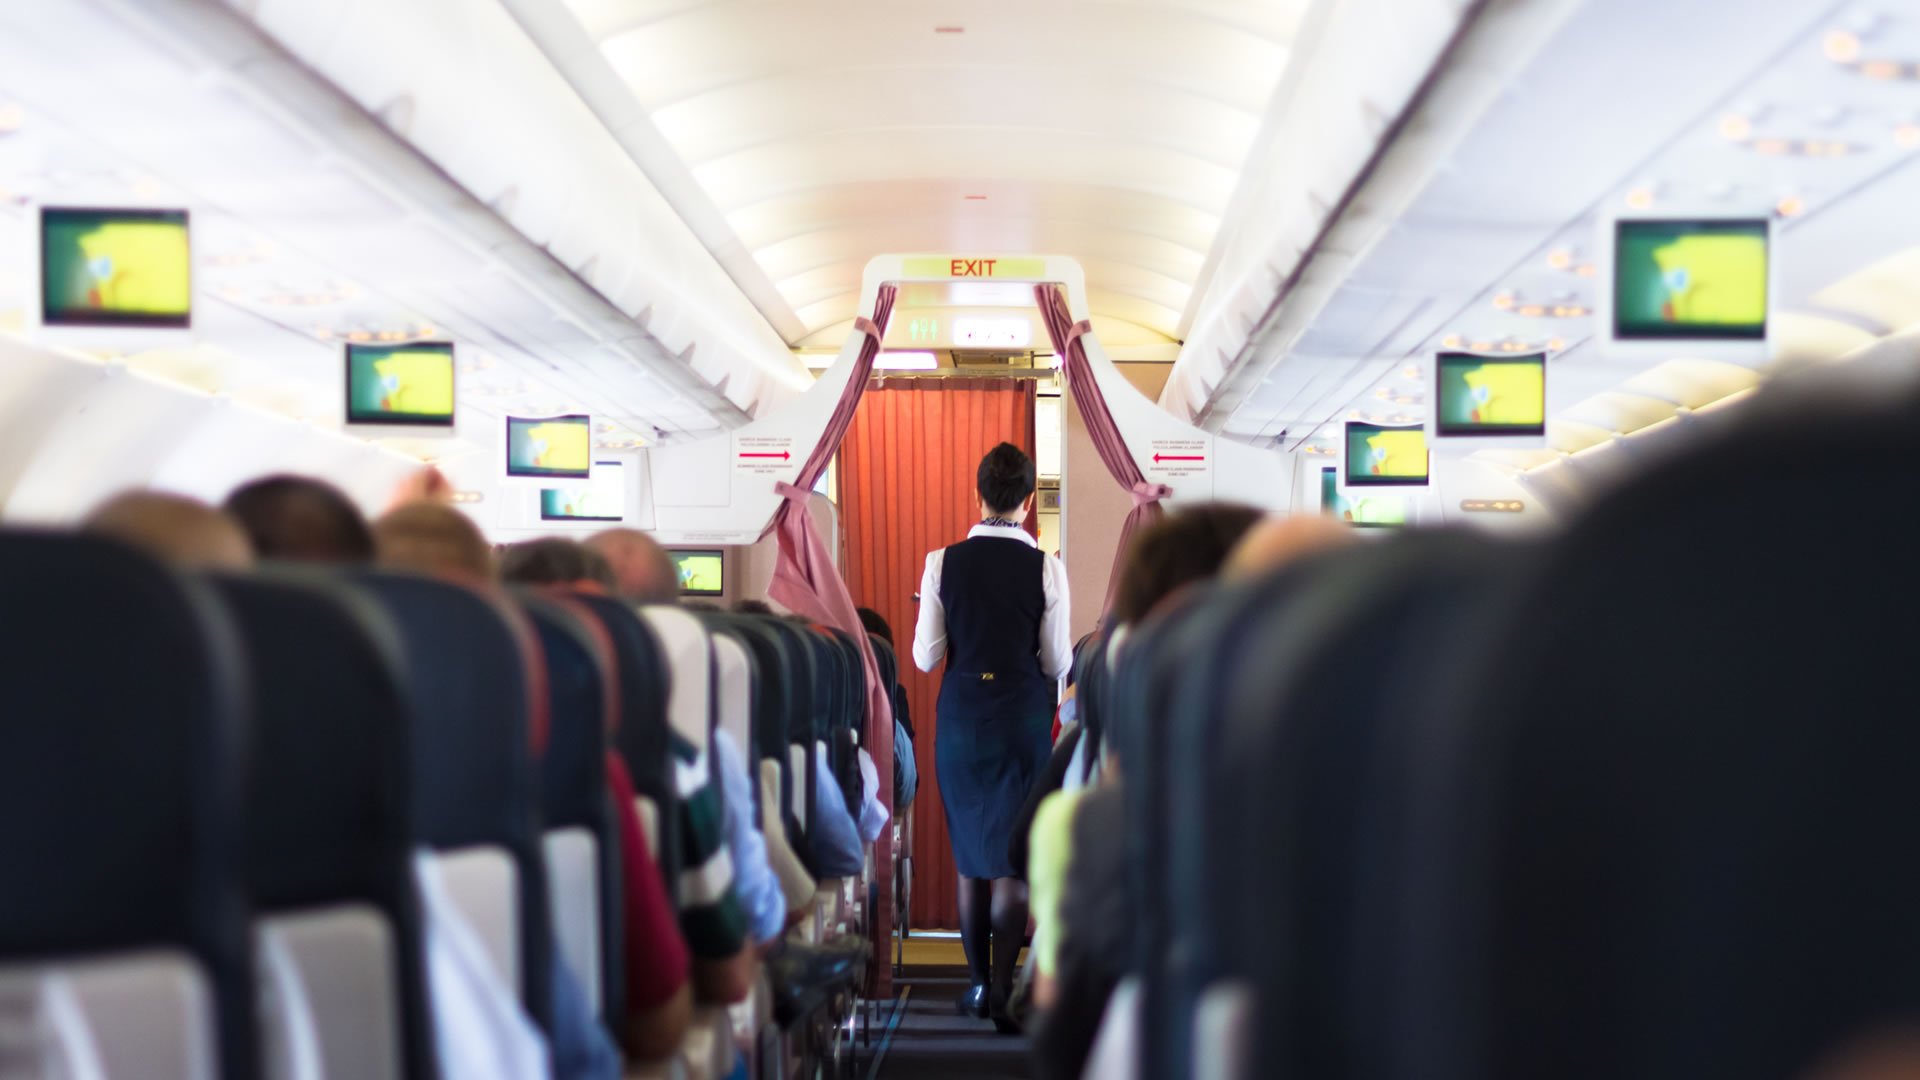 Tips for traveling by plane